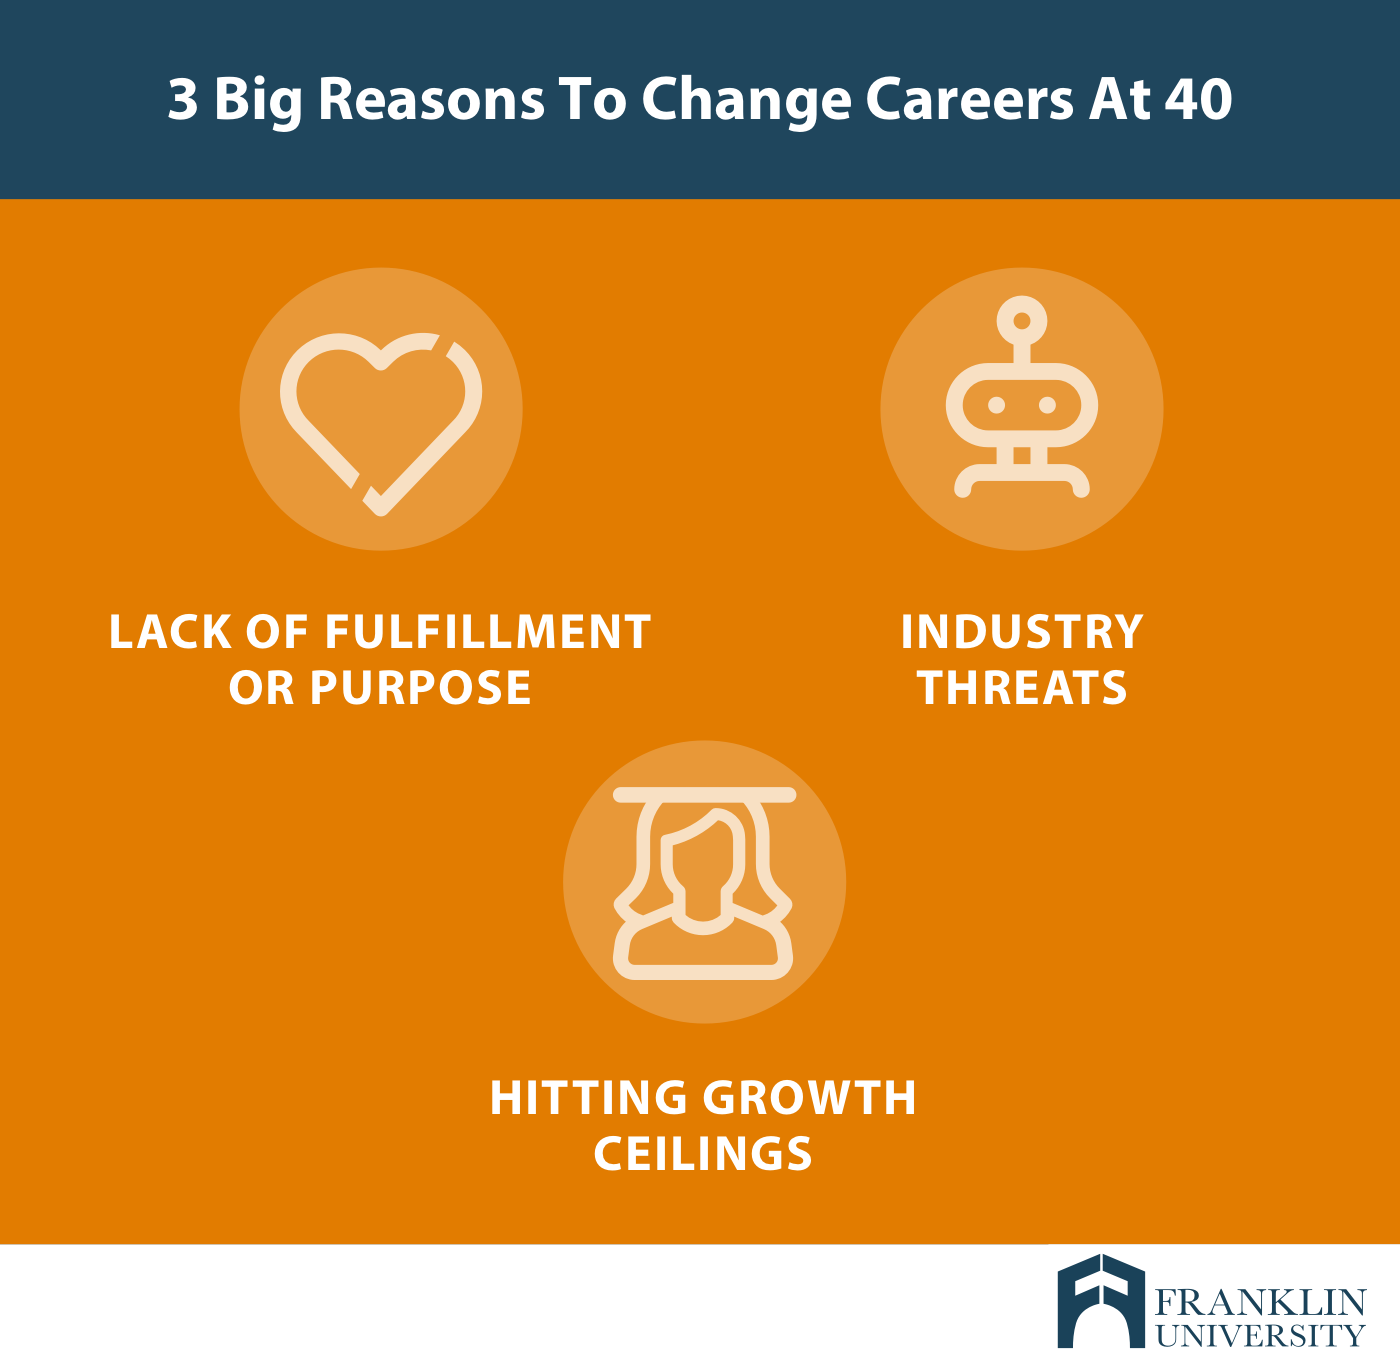 graphic describing 3 big reasons to change careers at 40